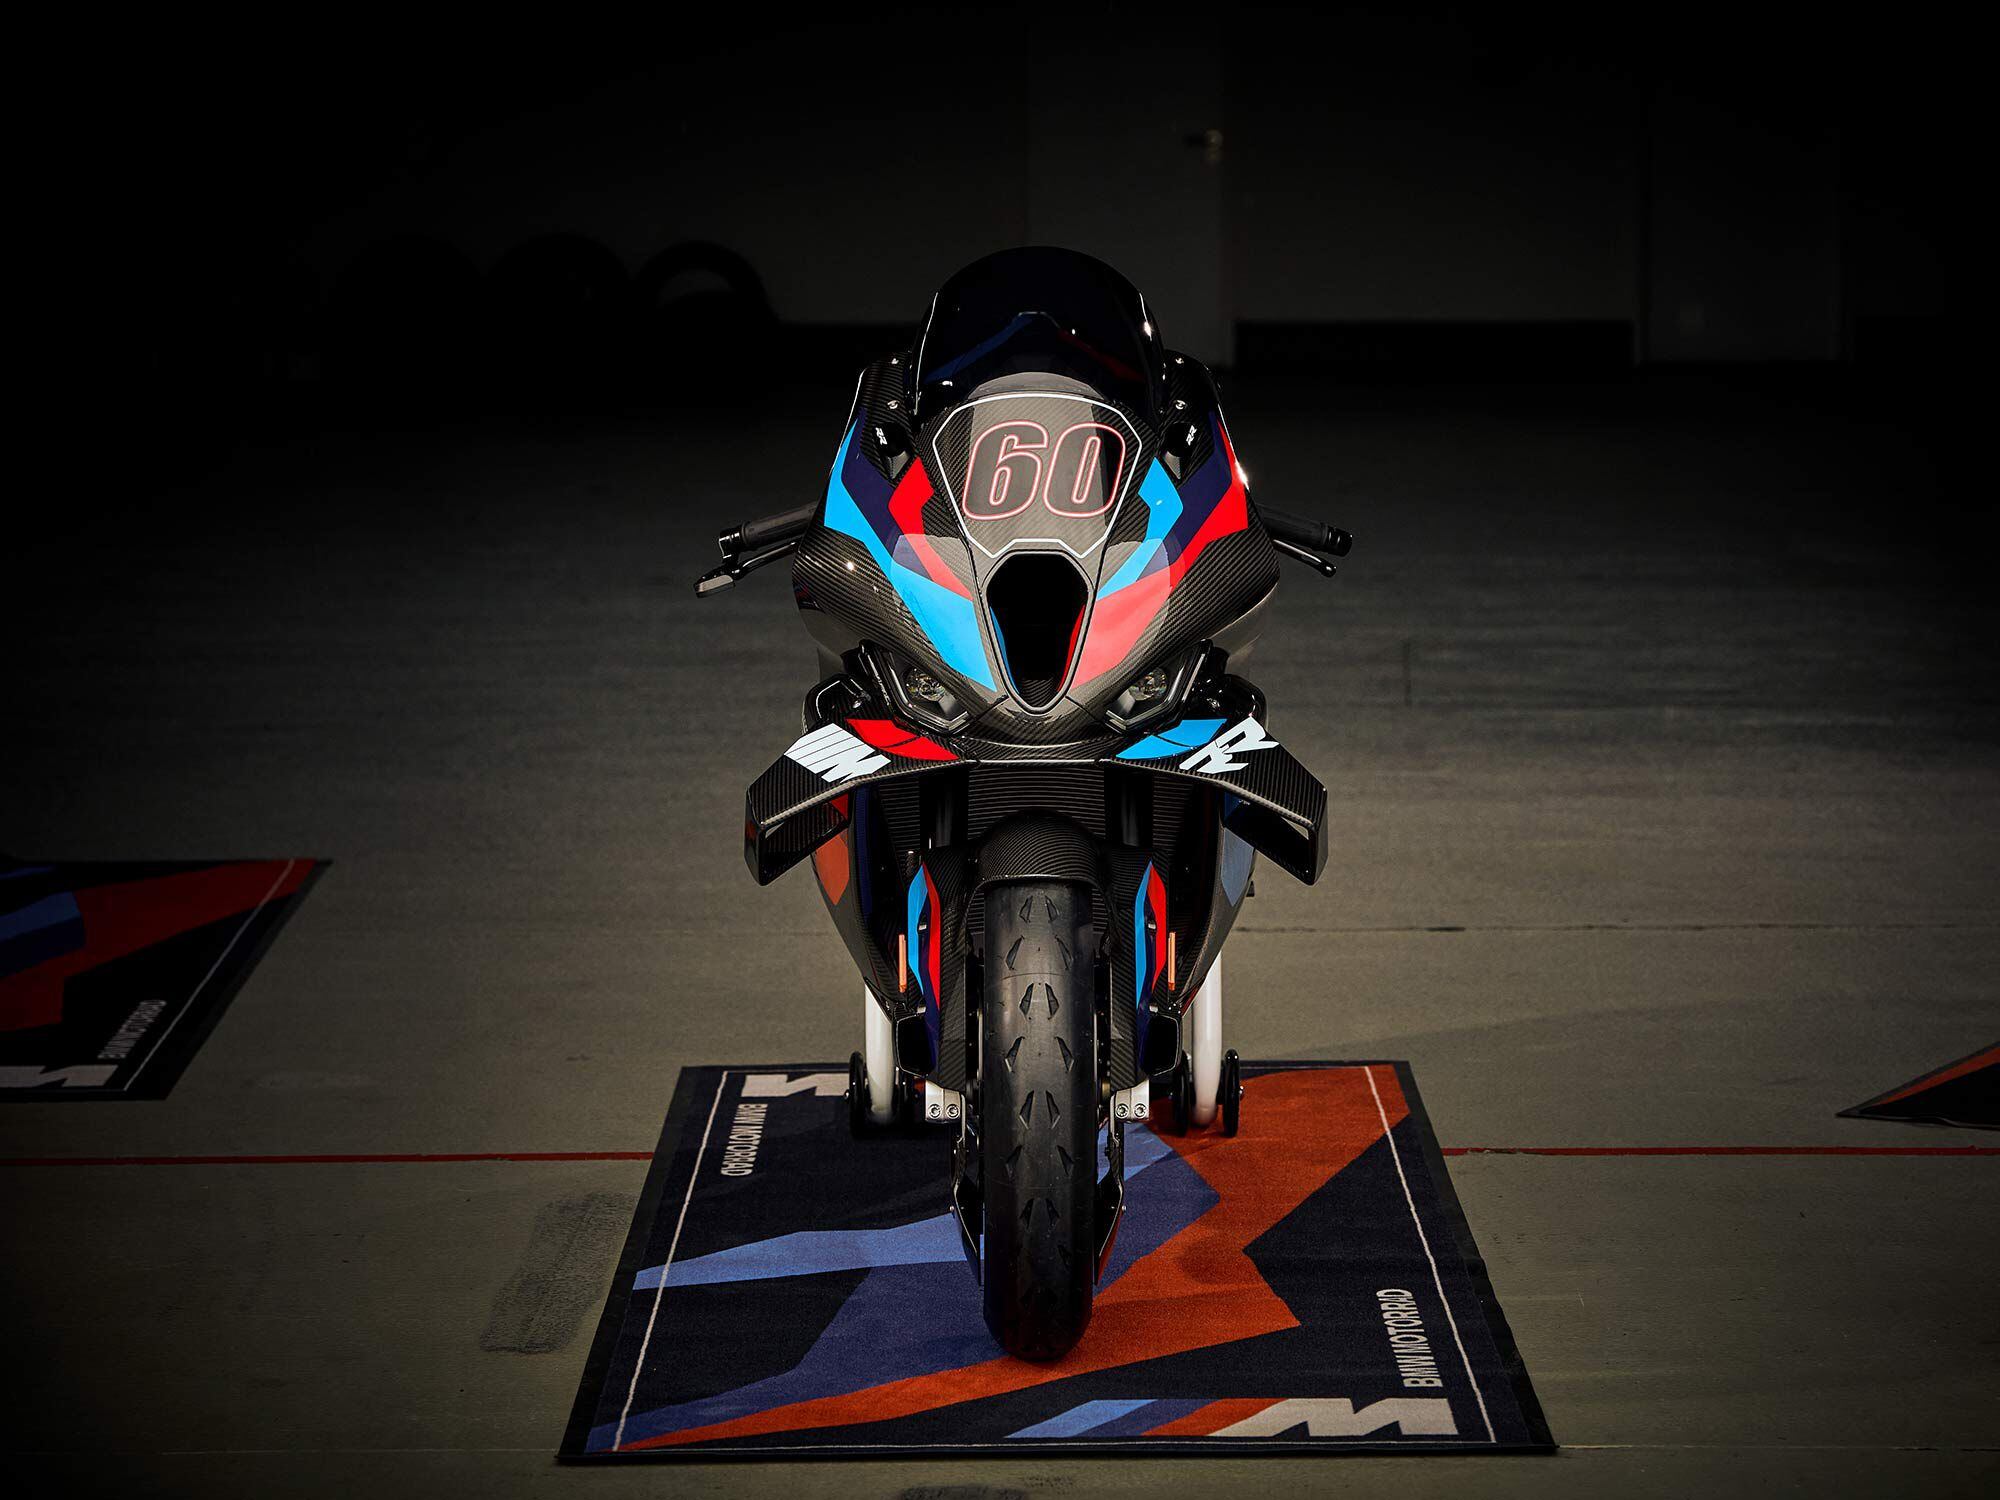 BMW’s M 1000 RR homologation special has perhaps the largest aero winglets currently on the market.